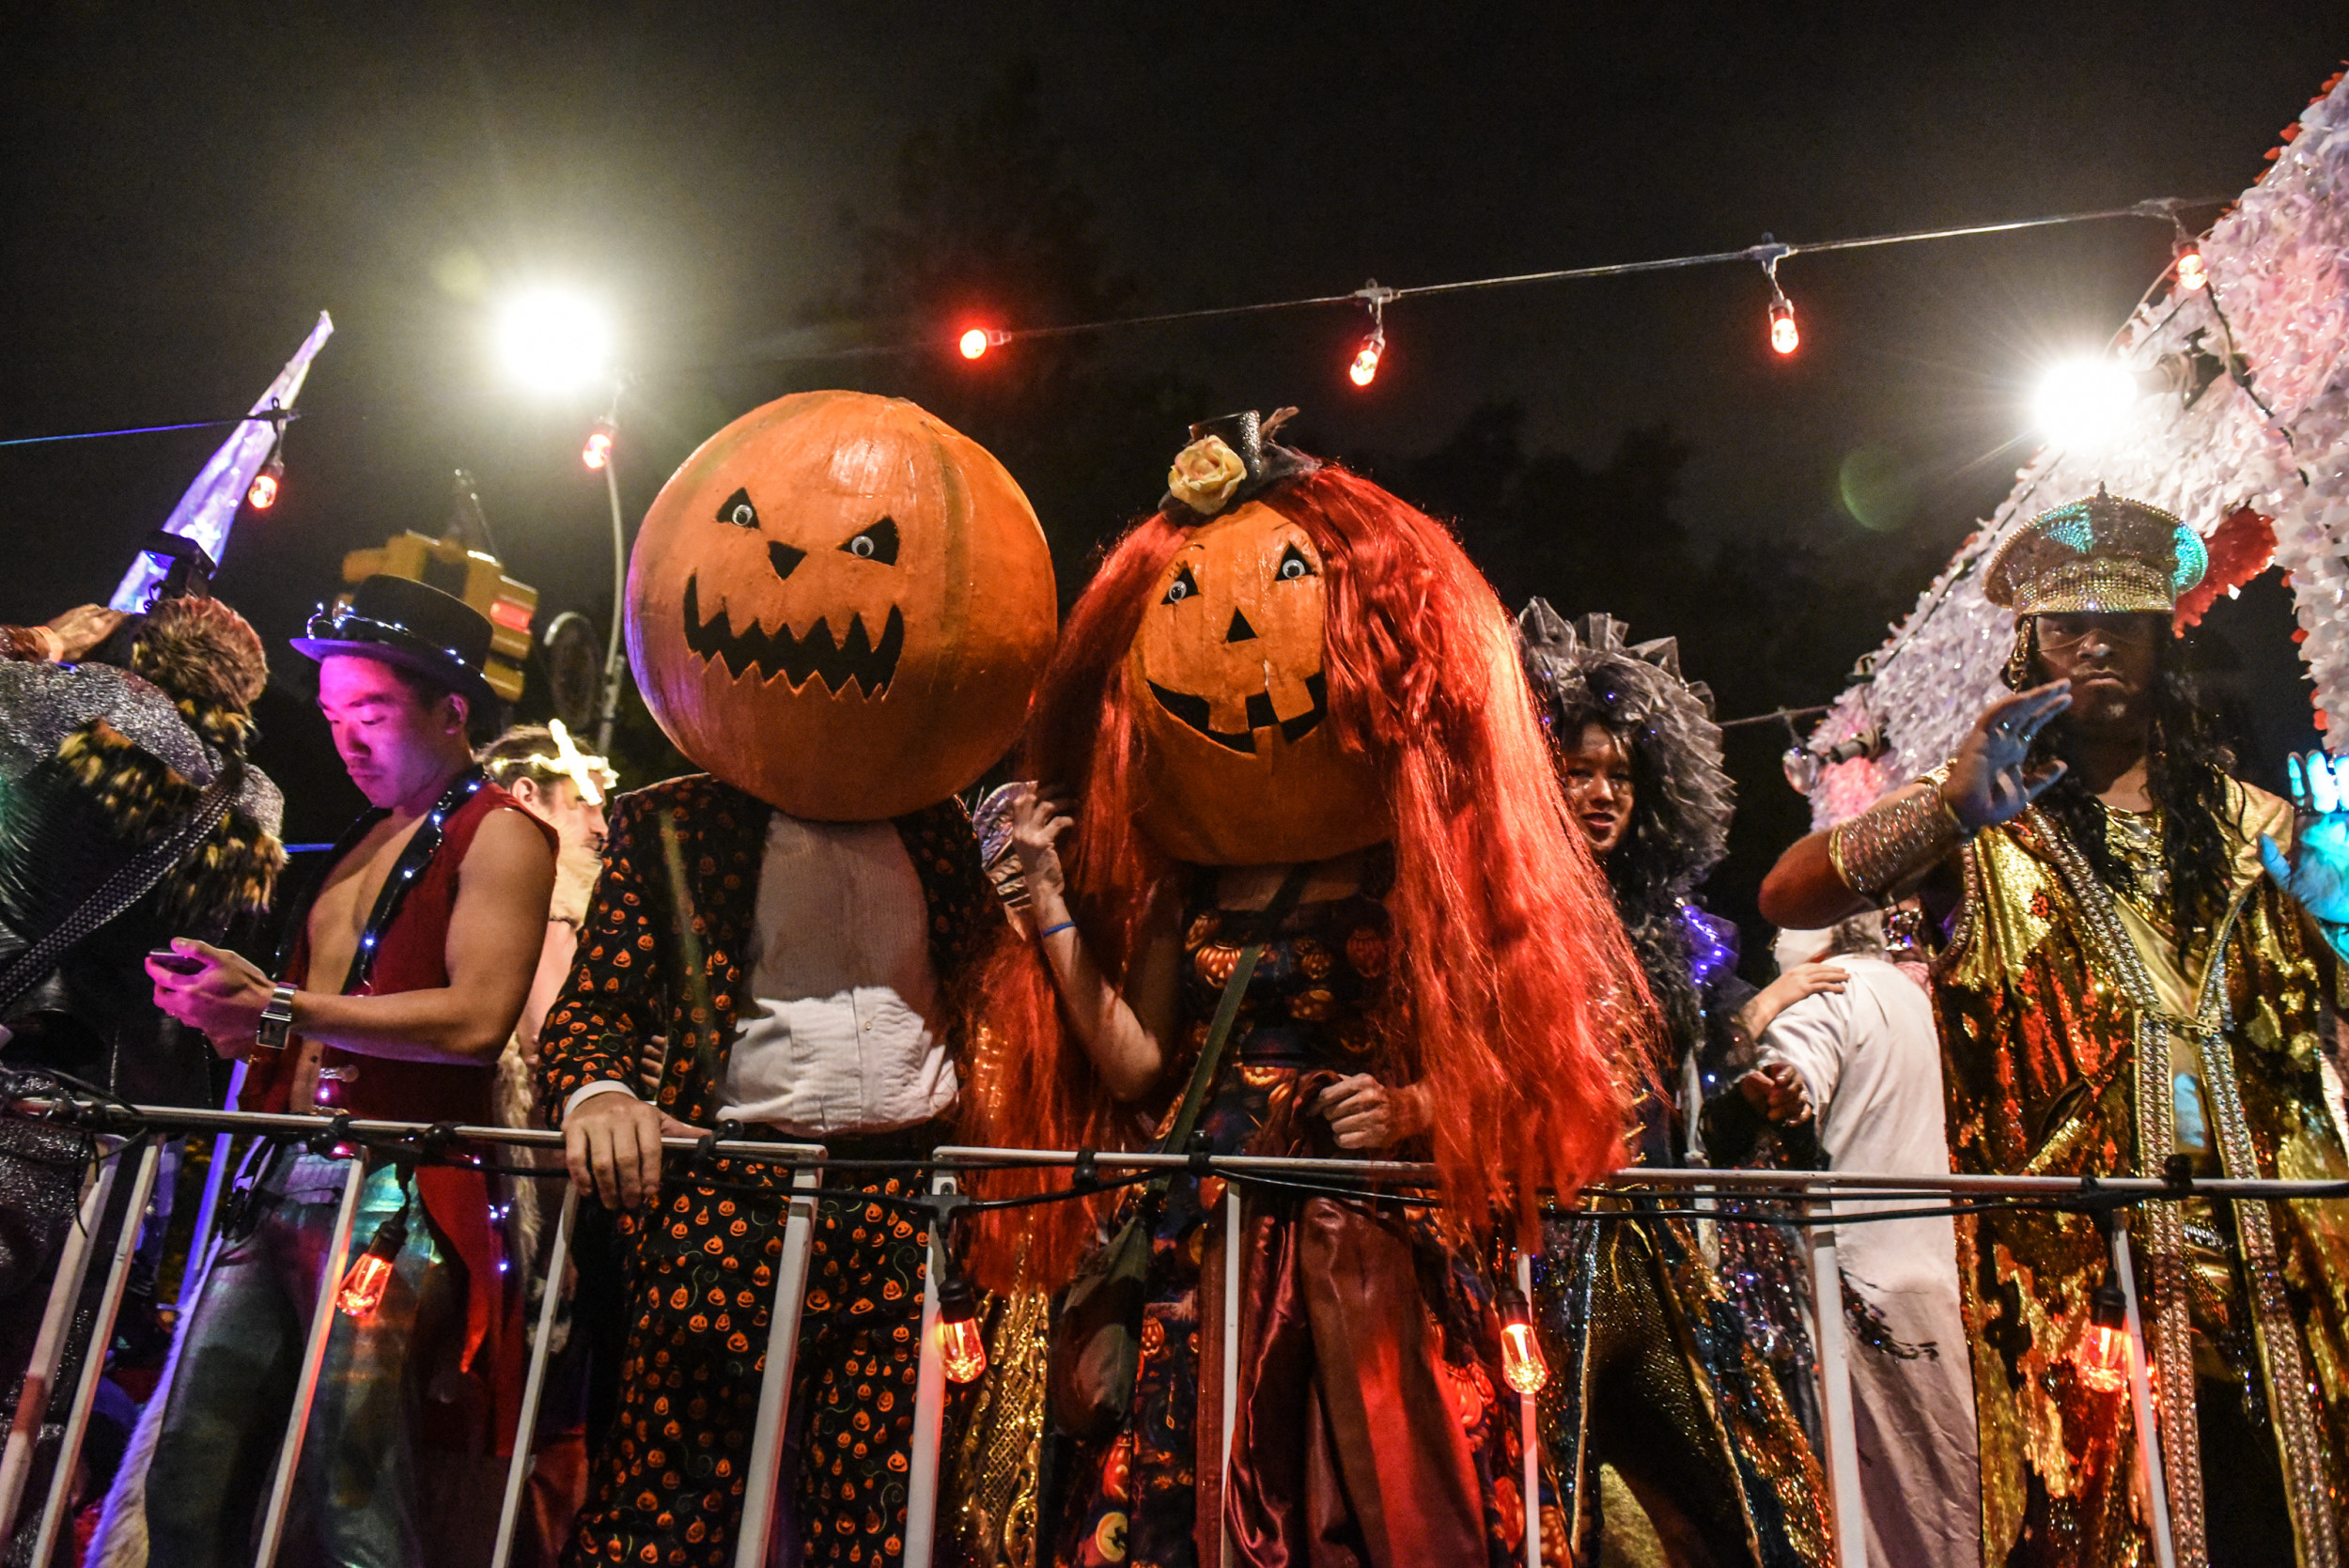 New York Halloween Parade 2019 Route, Road Closures, How to Live-Stream Village Procession